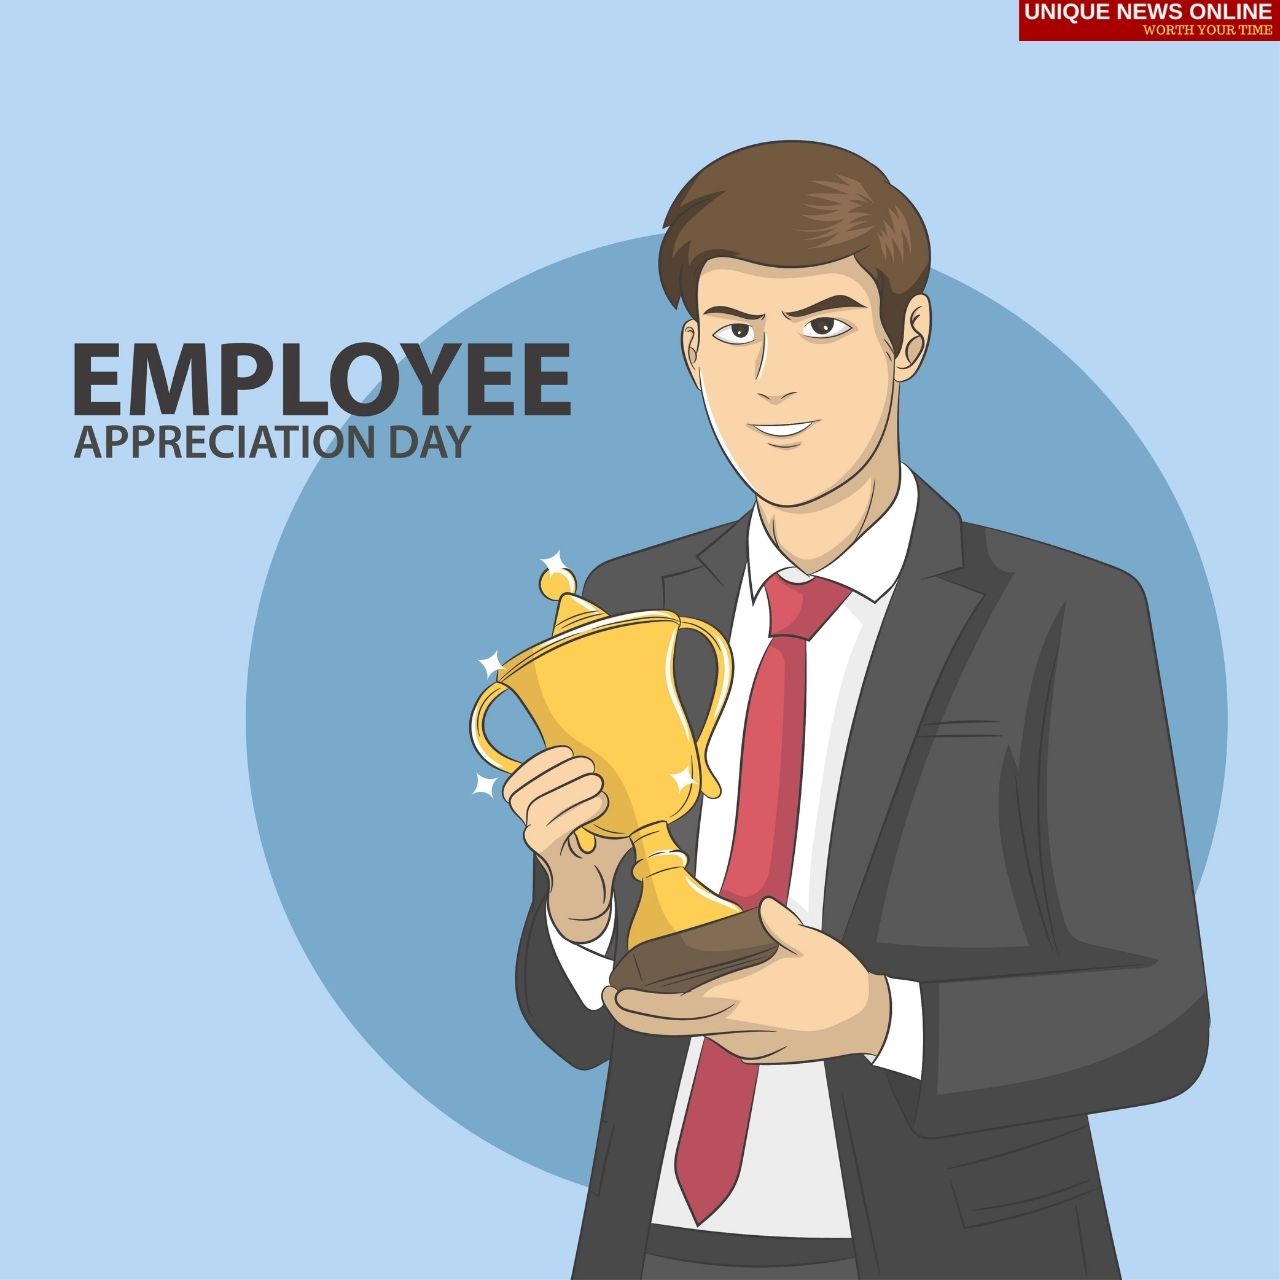 Employee Appreciation Day (USA) 2022 Instagram Captions, Facebook Messages, Twitter Greetings, Pinterest Images, and other Social Media Posts to Share